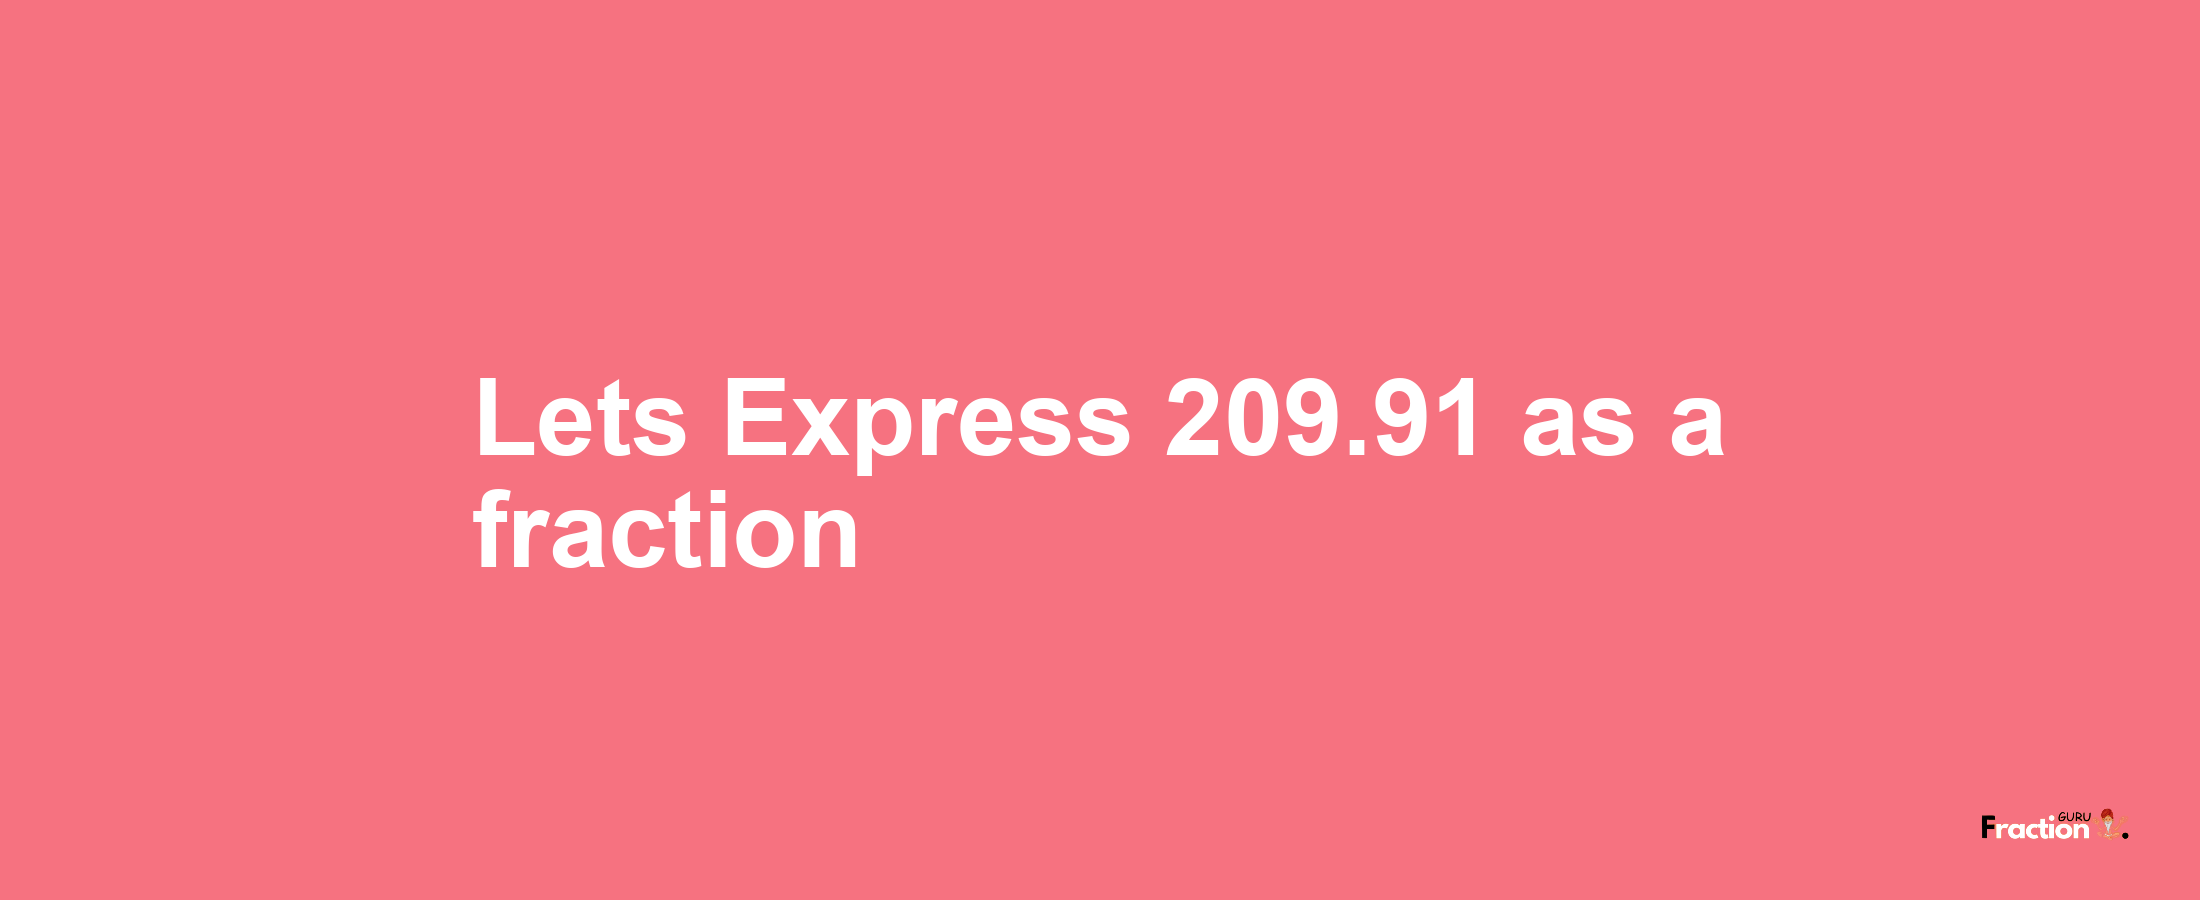 Lets Express 209.91 as afraction